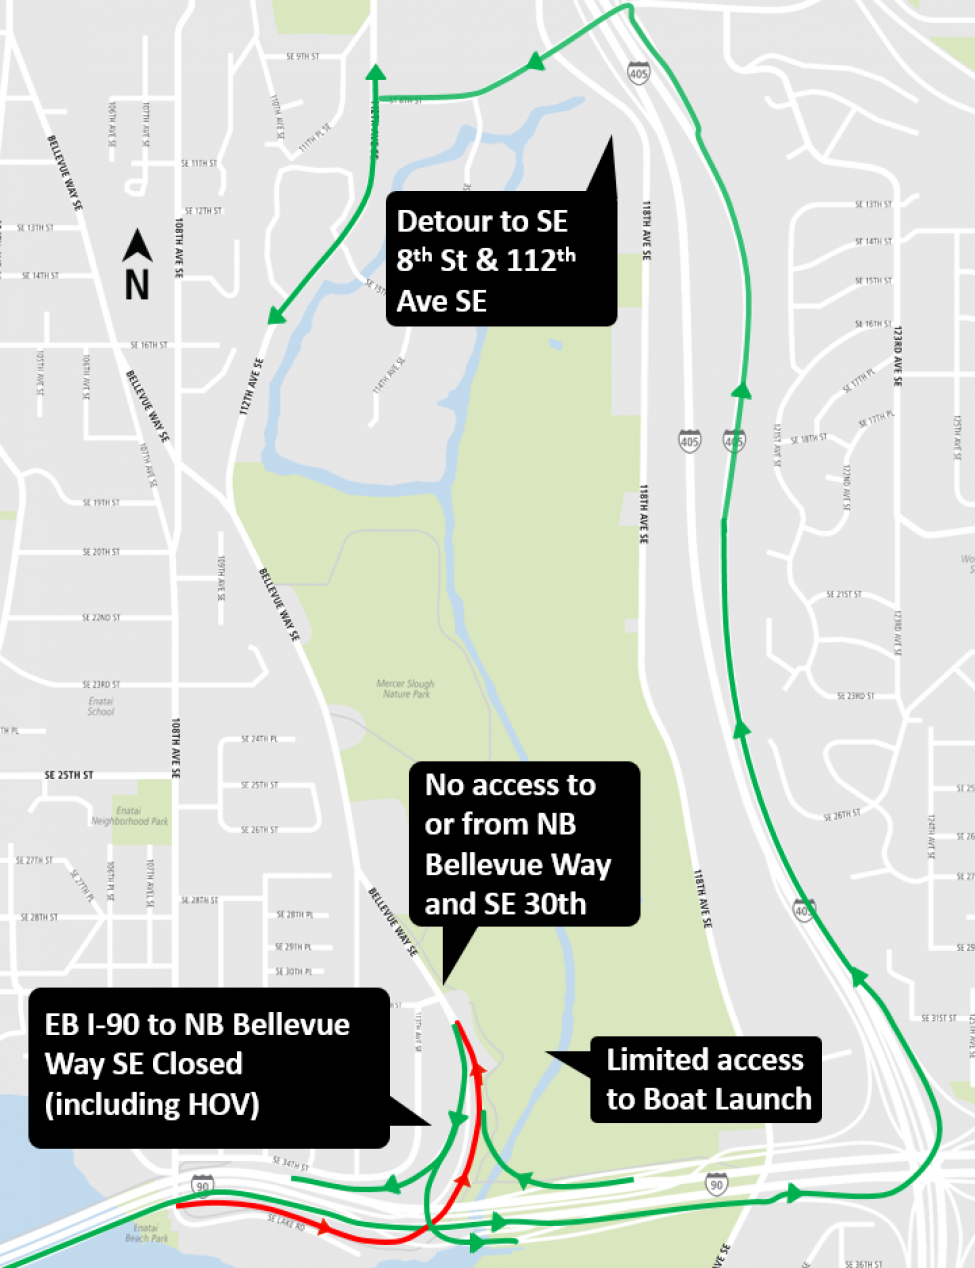 Map of Bellevue Way Southeast and I-90 on and off-ramp closures and restrictions.